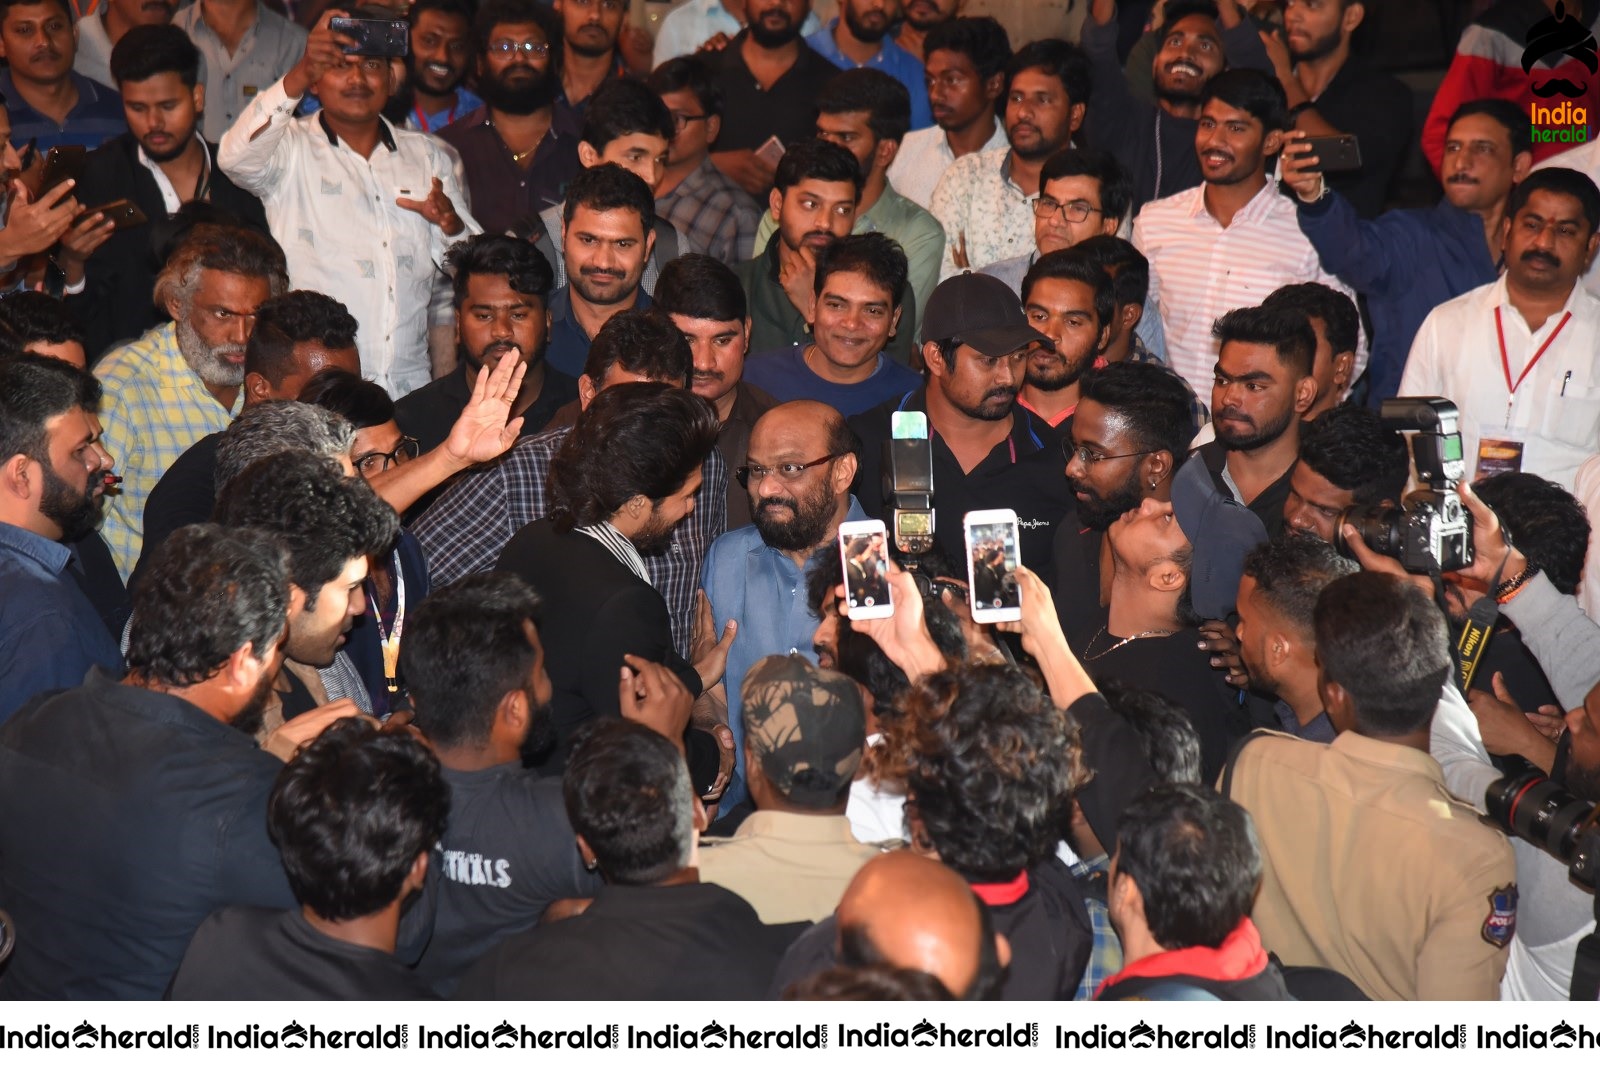 Actor Allu Arjun mobbed by Crowd during his Mass Entry Set 2